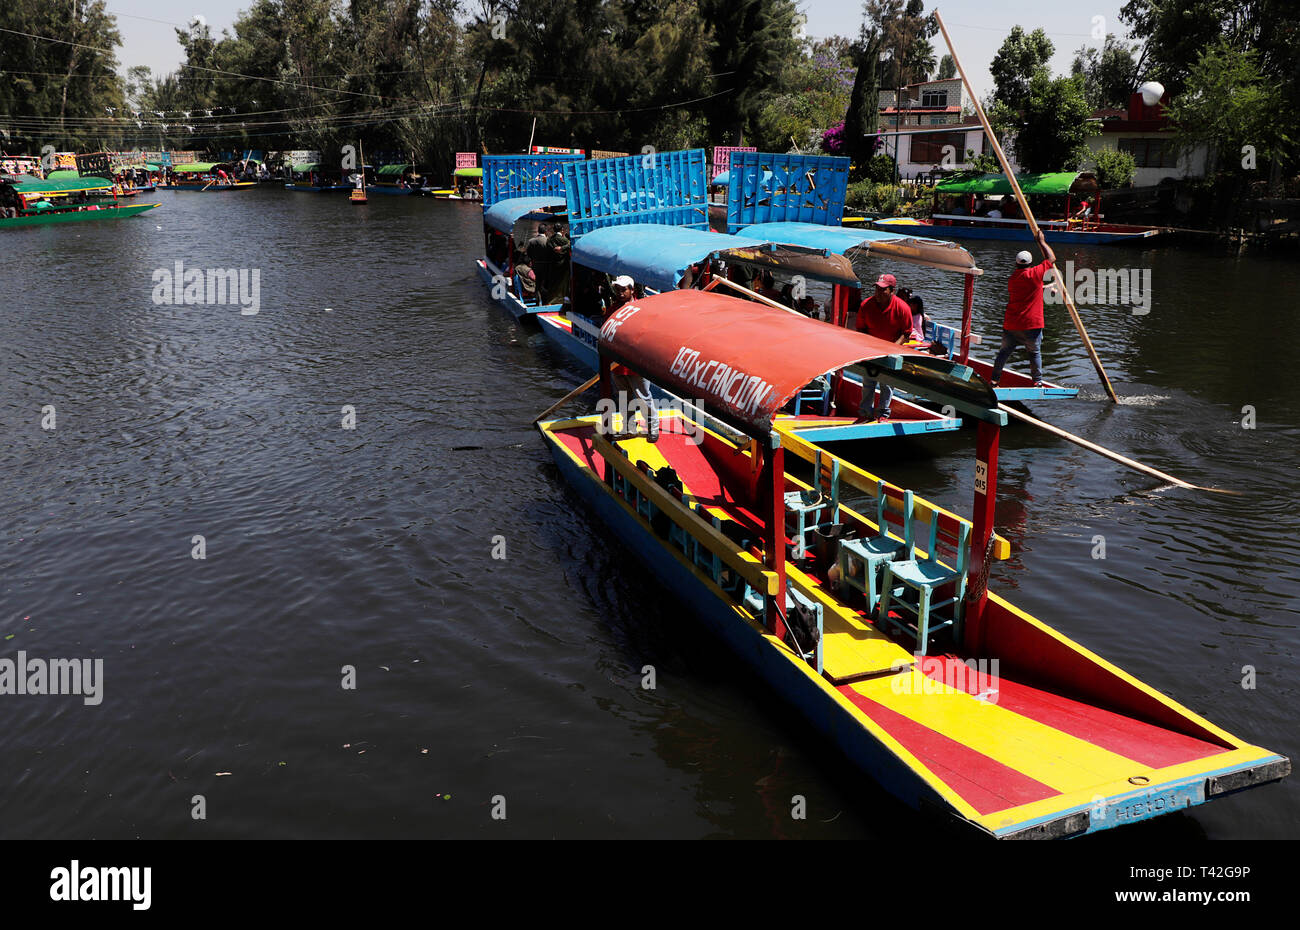 12 April 2019, Mexico, Mexiko-Stadt: Trajinera operate on a canal in Xochimilco. Located on the southern outskirts of the metropolis of millions, the canals on which the colourfully decorated boats sail are a popular excursion destination. Photo: Gerardo Vieyra/dpa Stock Photo